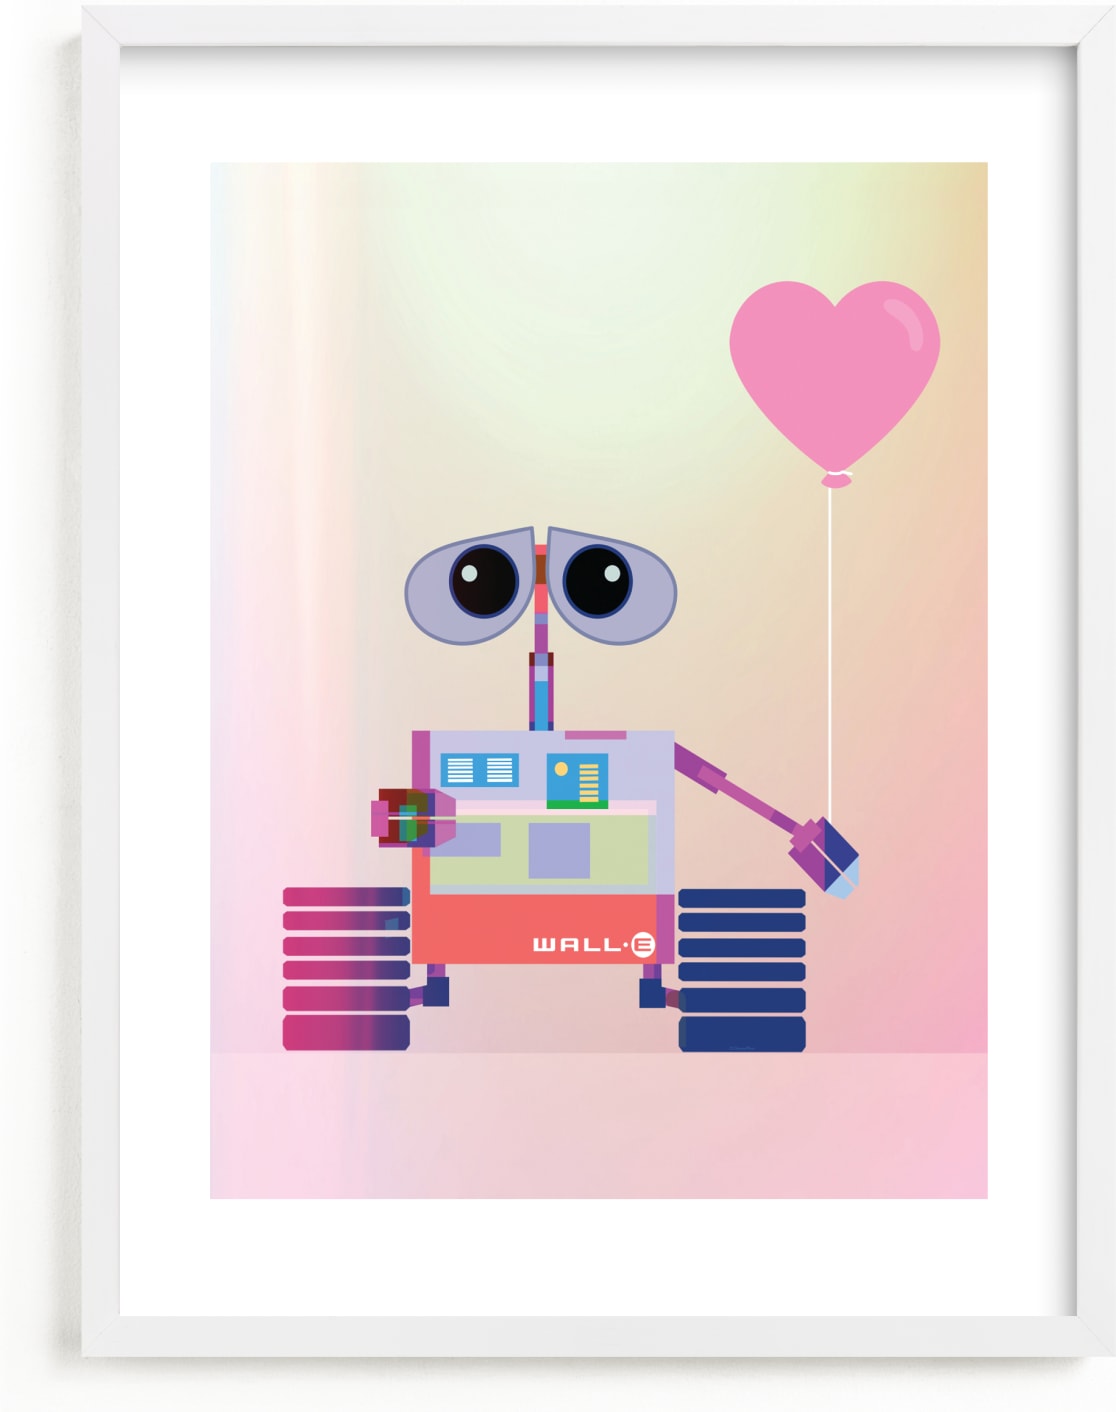 This is a colorful disney art by Maja Cunningham called Disney and Pixar's Wall-E in technicolor.